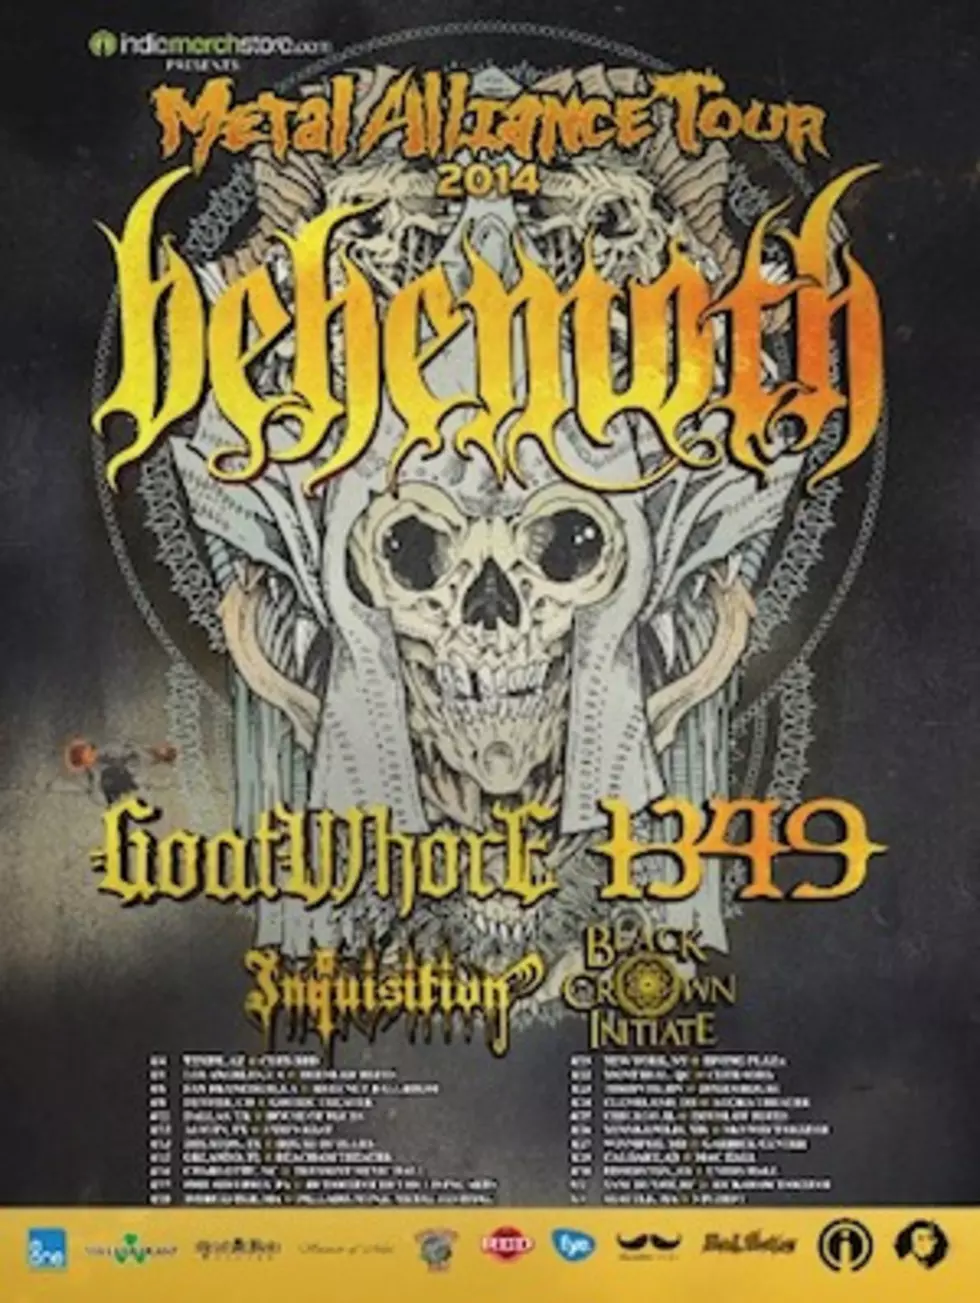 Behemoth, Goatwhore, 1349, Inquisition + More Confirmed for 2014 Metal Alliance Tour